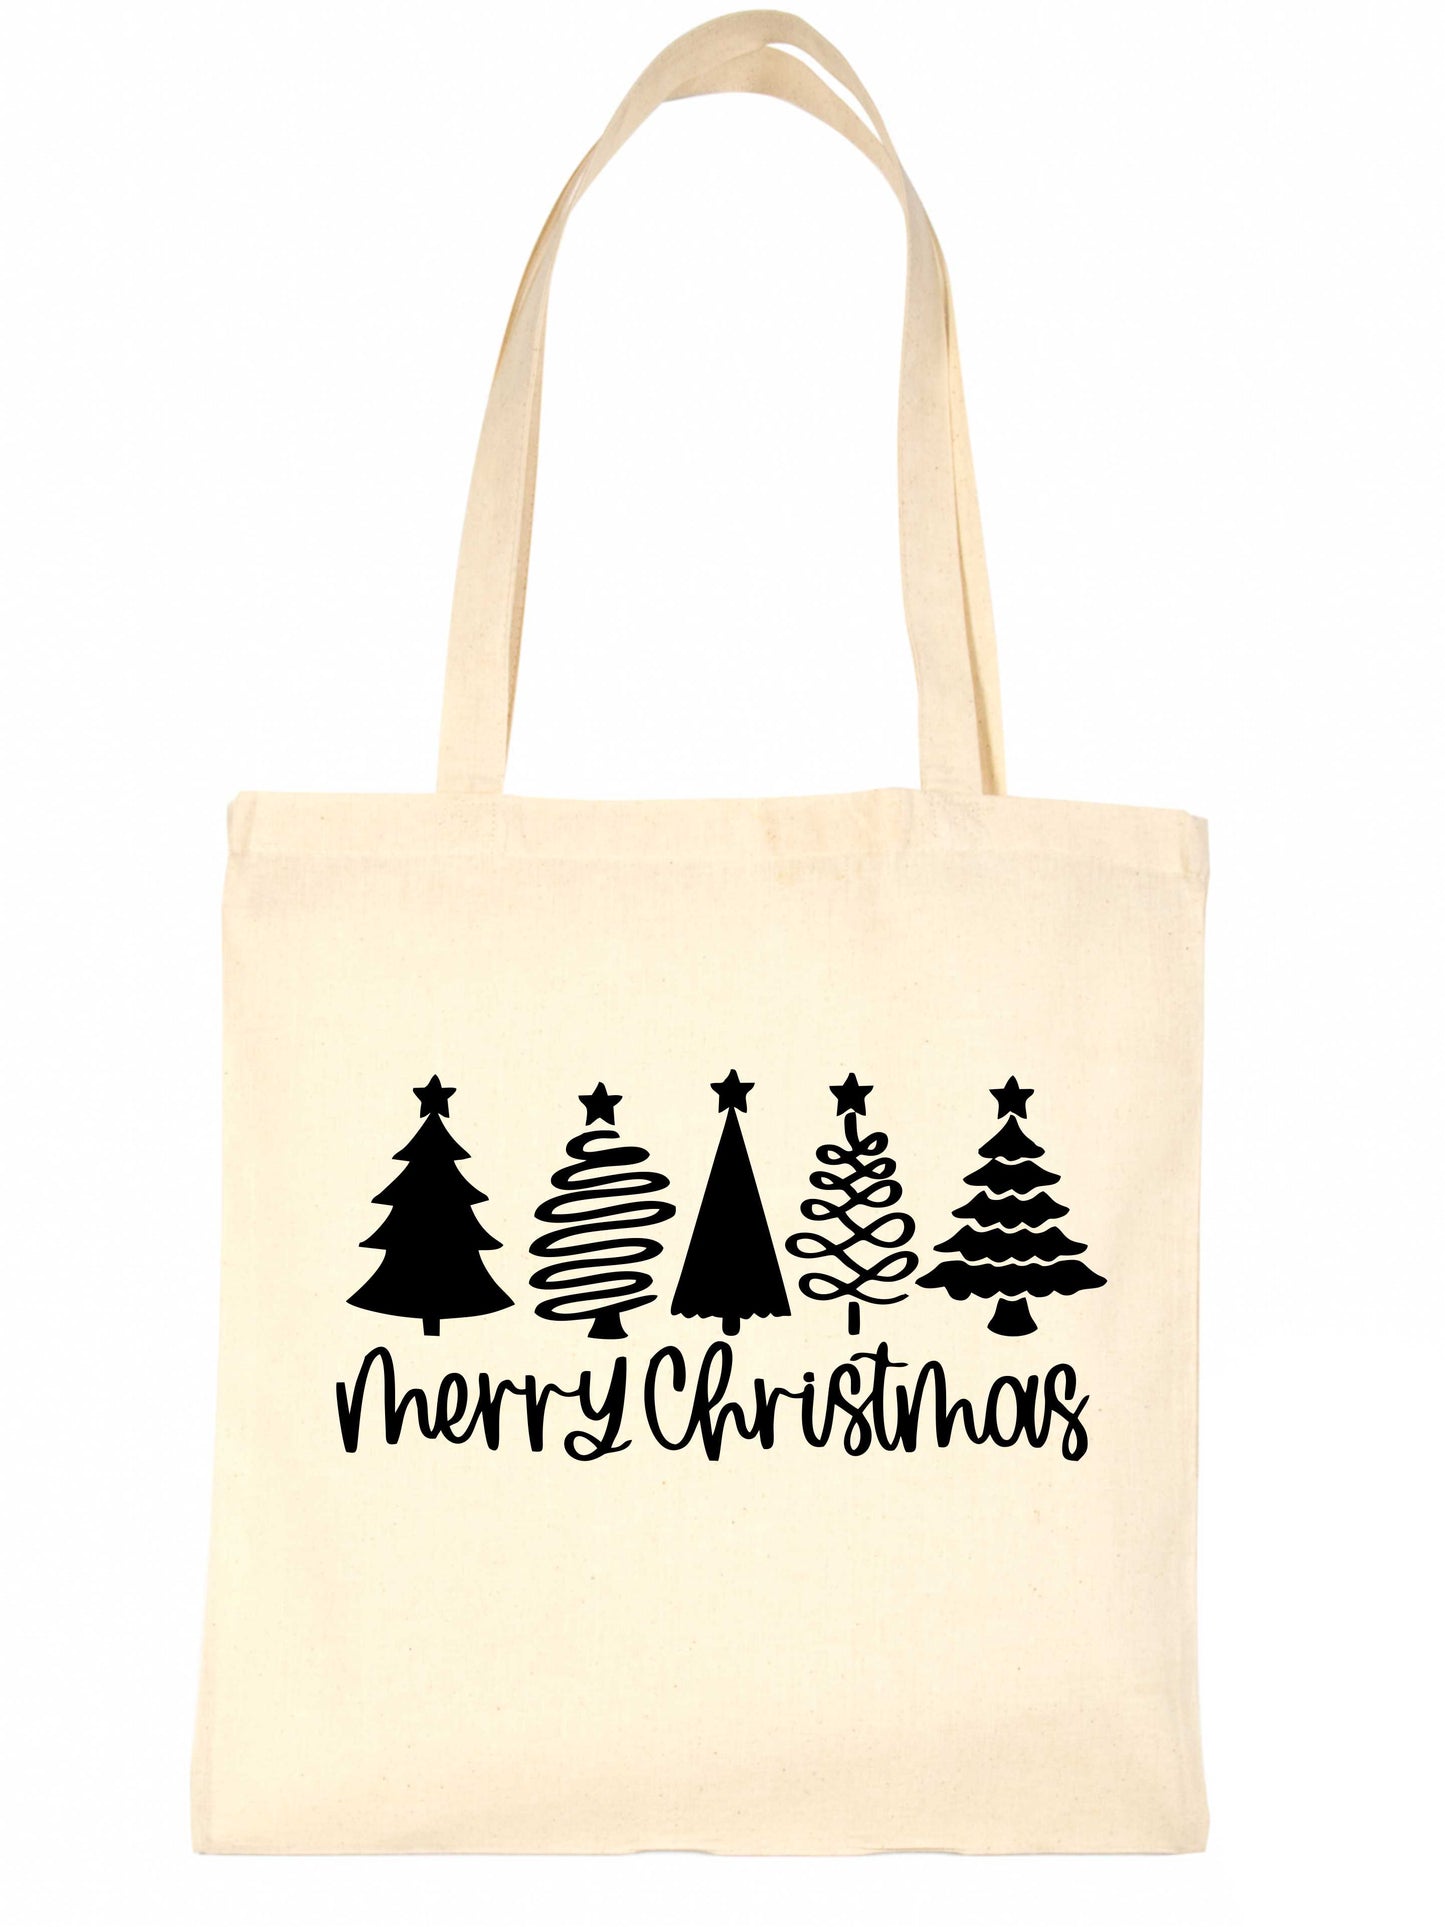 Merry Christmas Funny Reusable Shopping Tote Bag Ideal For Xmas Present